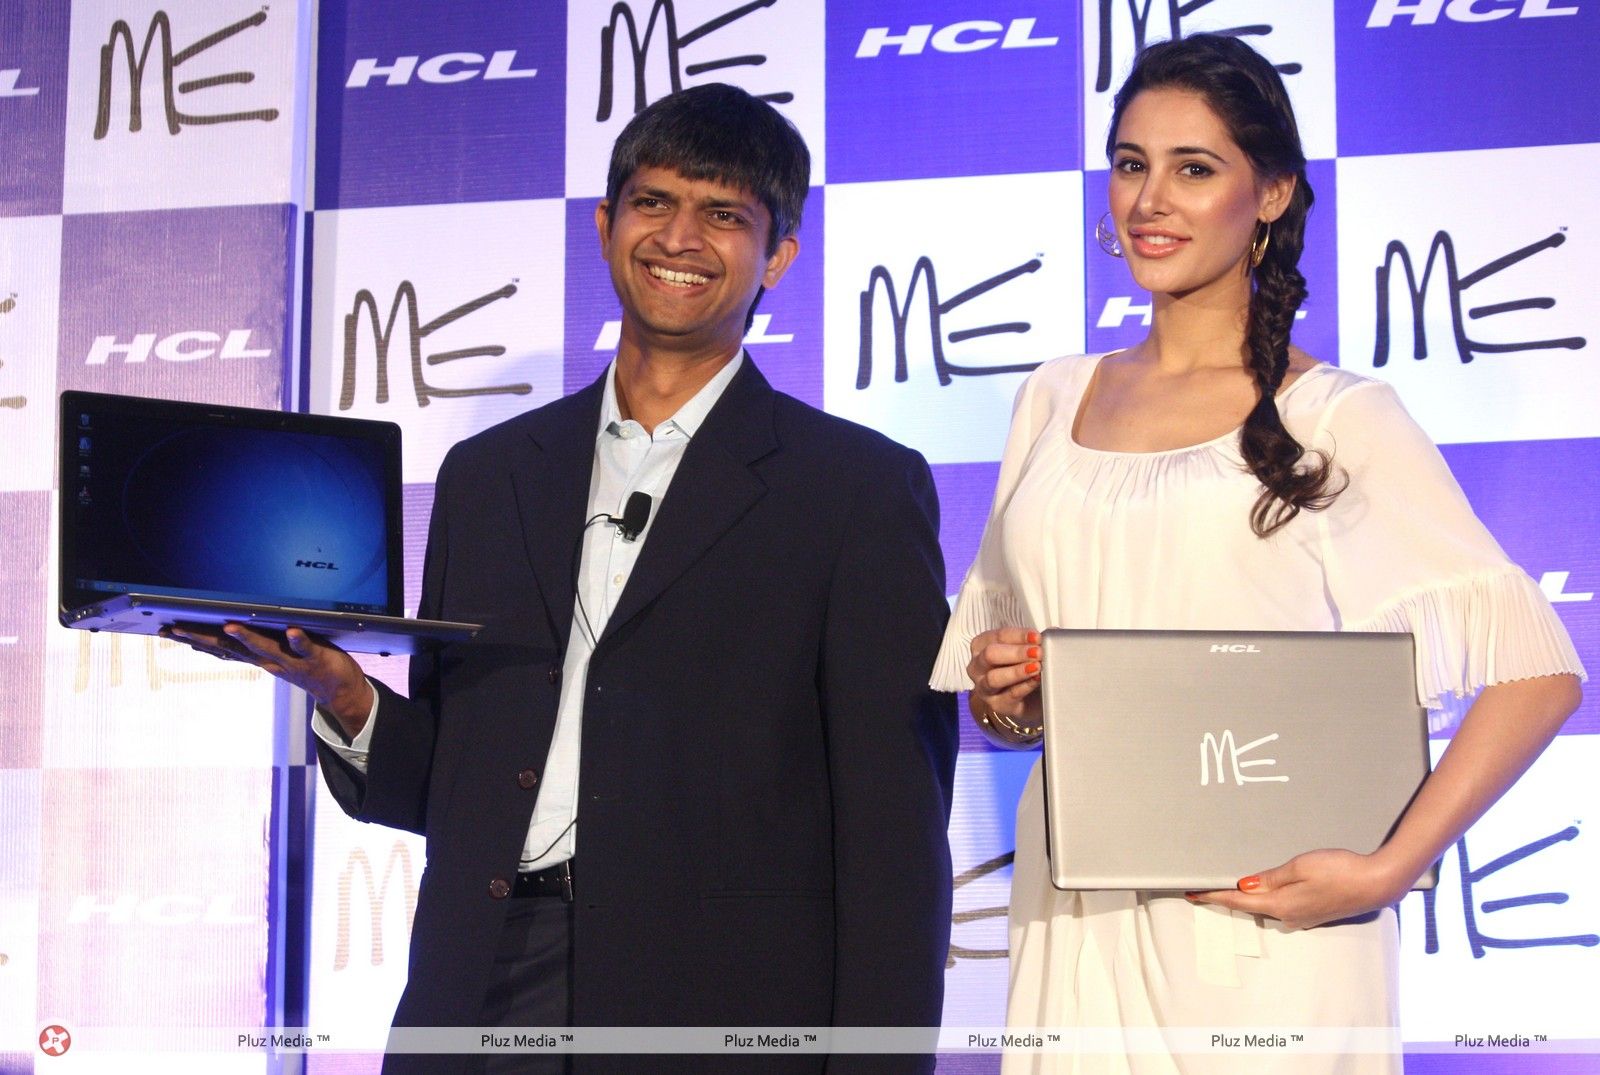 Nargis Fakhri at the launch of HCL Me Ultrabook Photos | Picture 279280